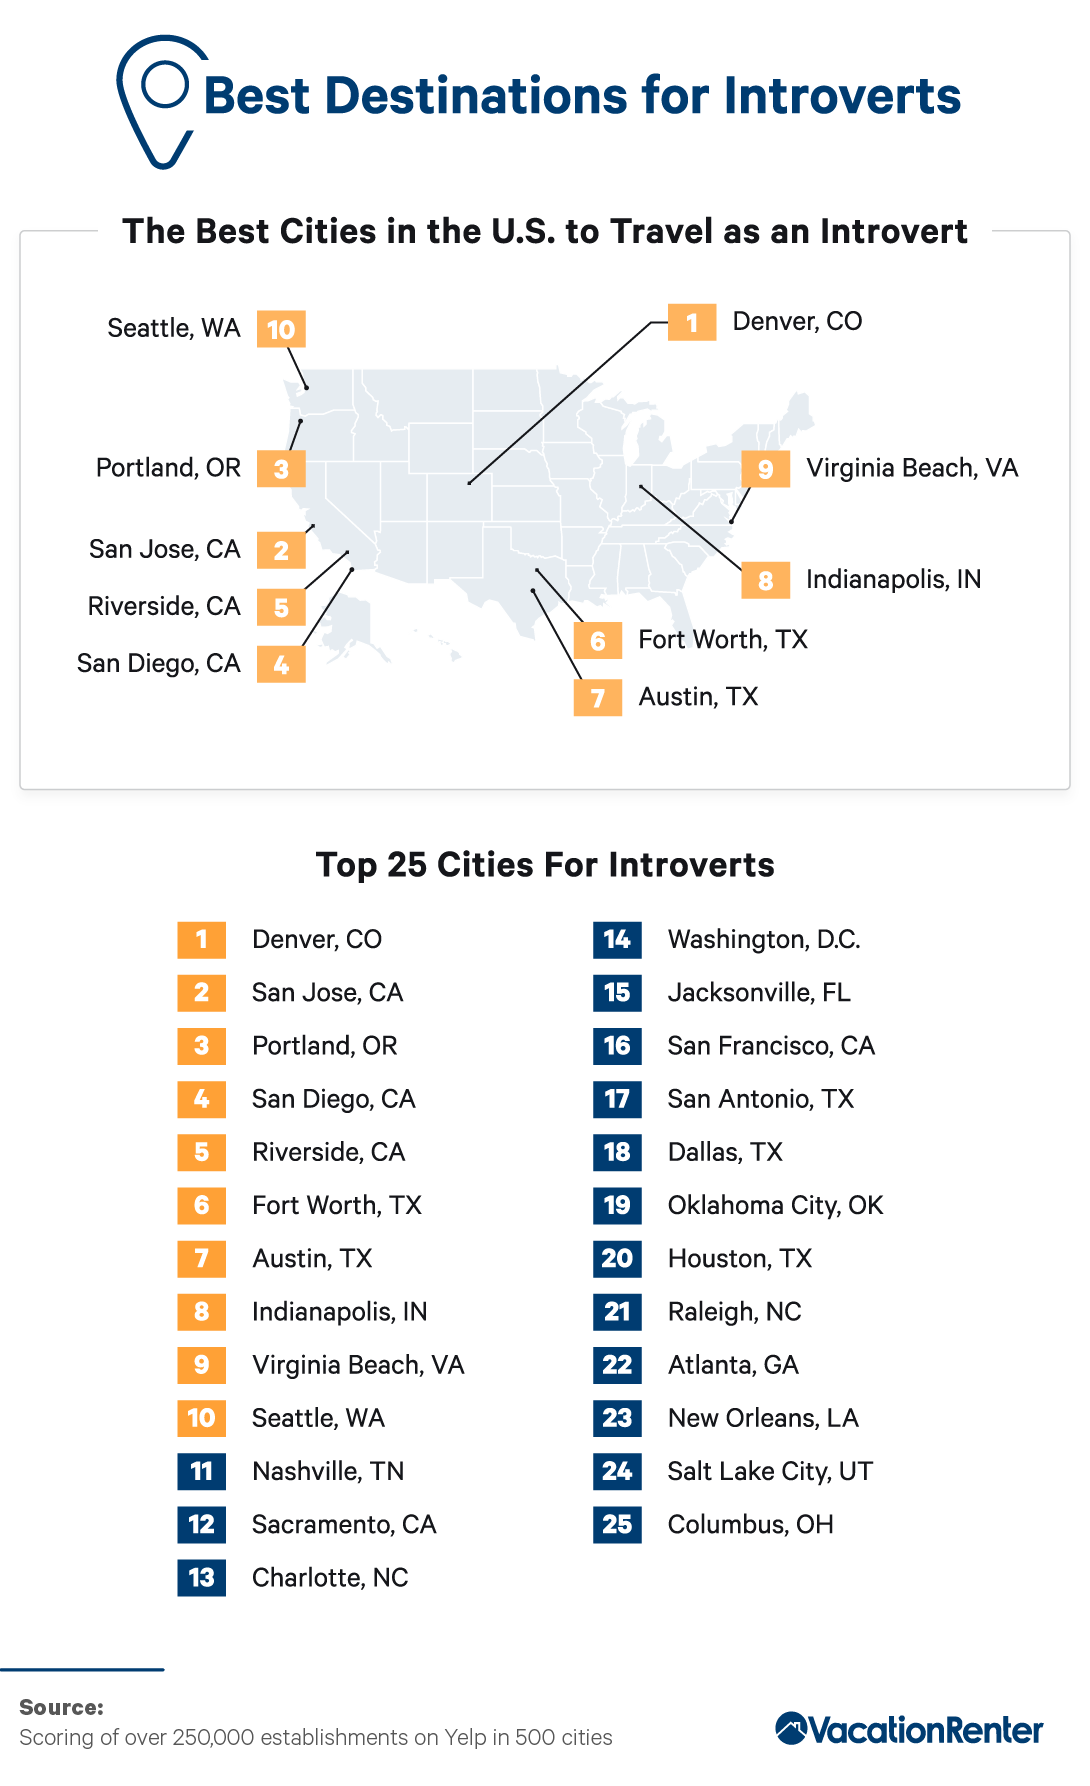 Map and list of the best cities in the U.S. for introverts